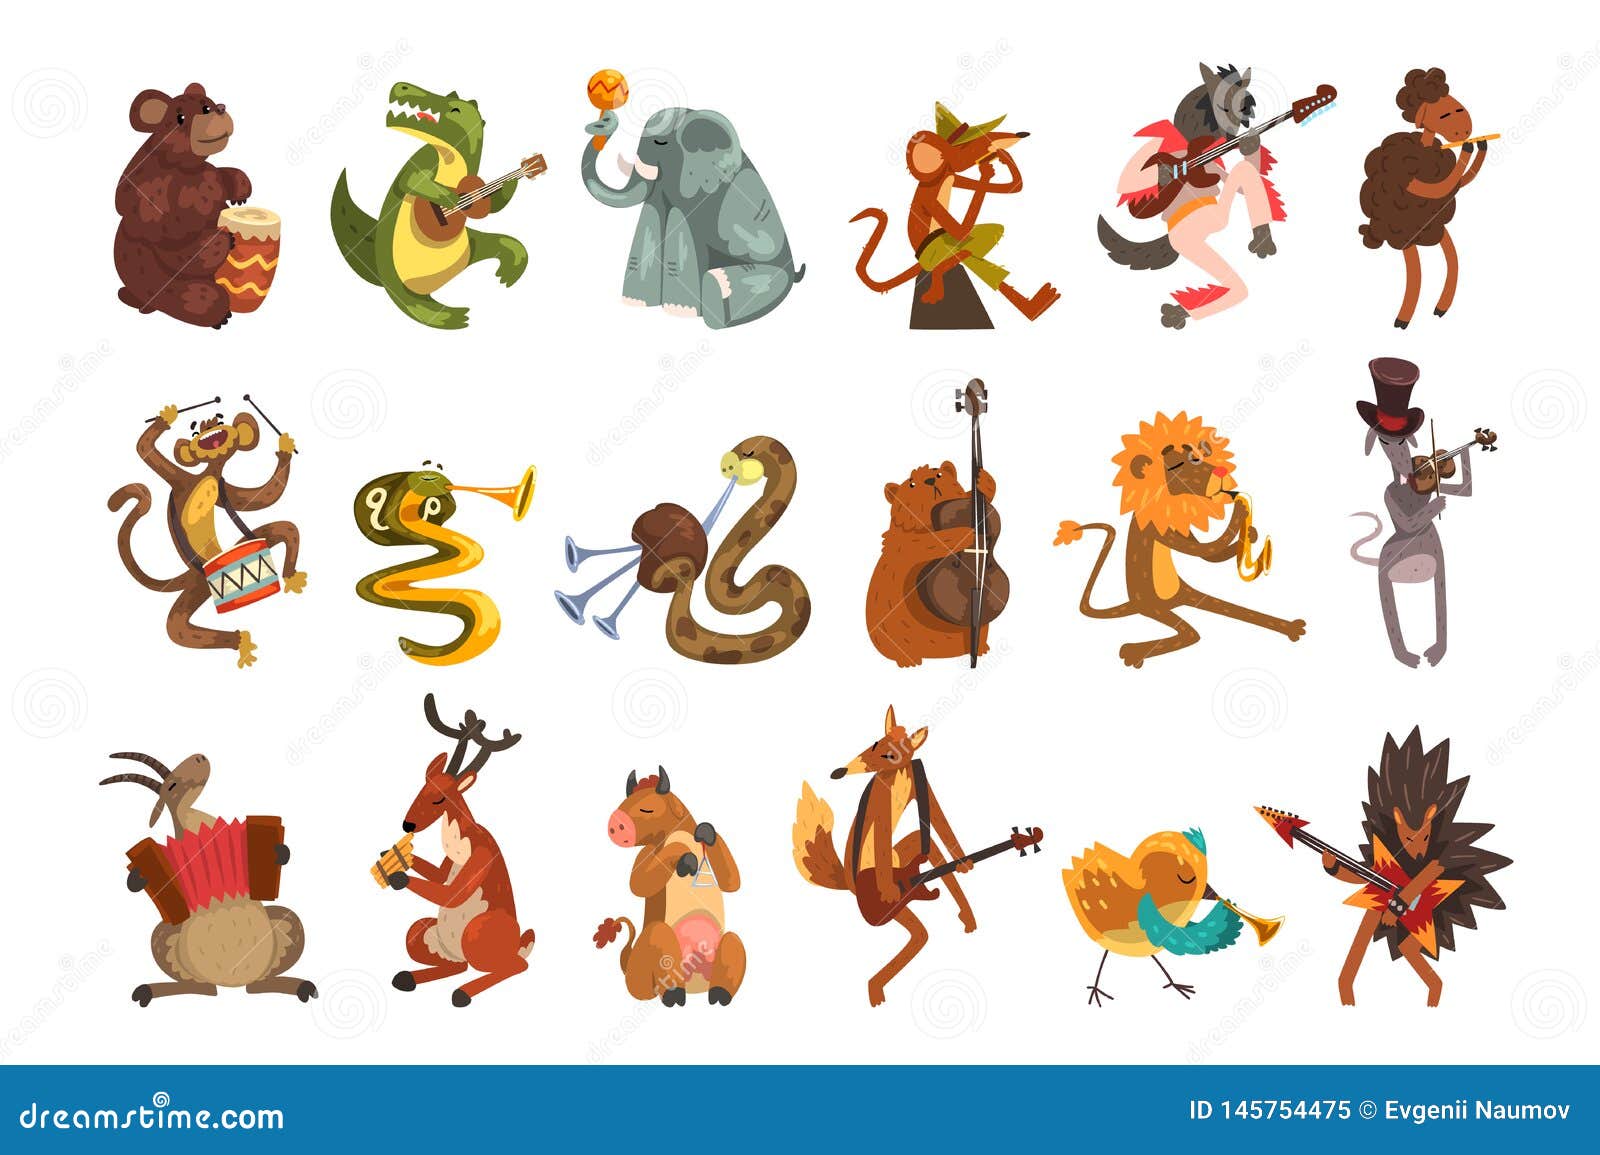 cute cartoon animal characters playing various musical instruments  s on a white background